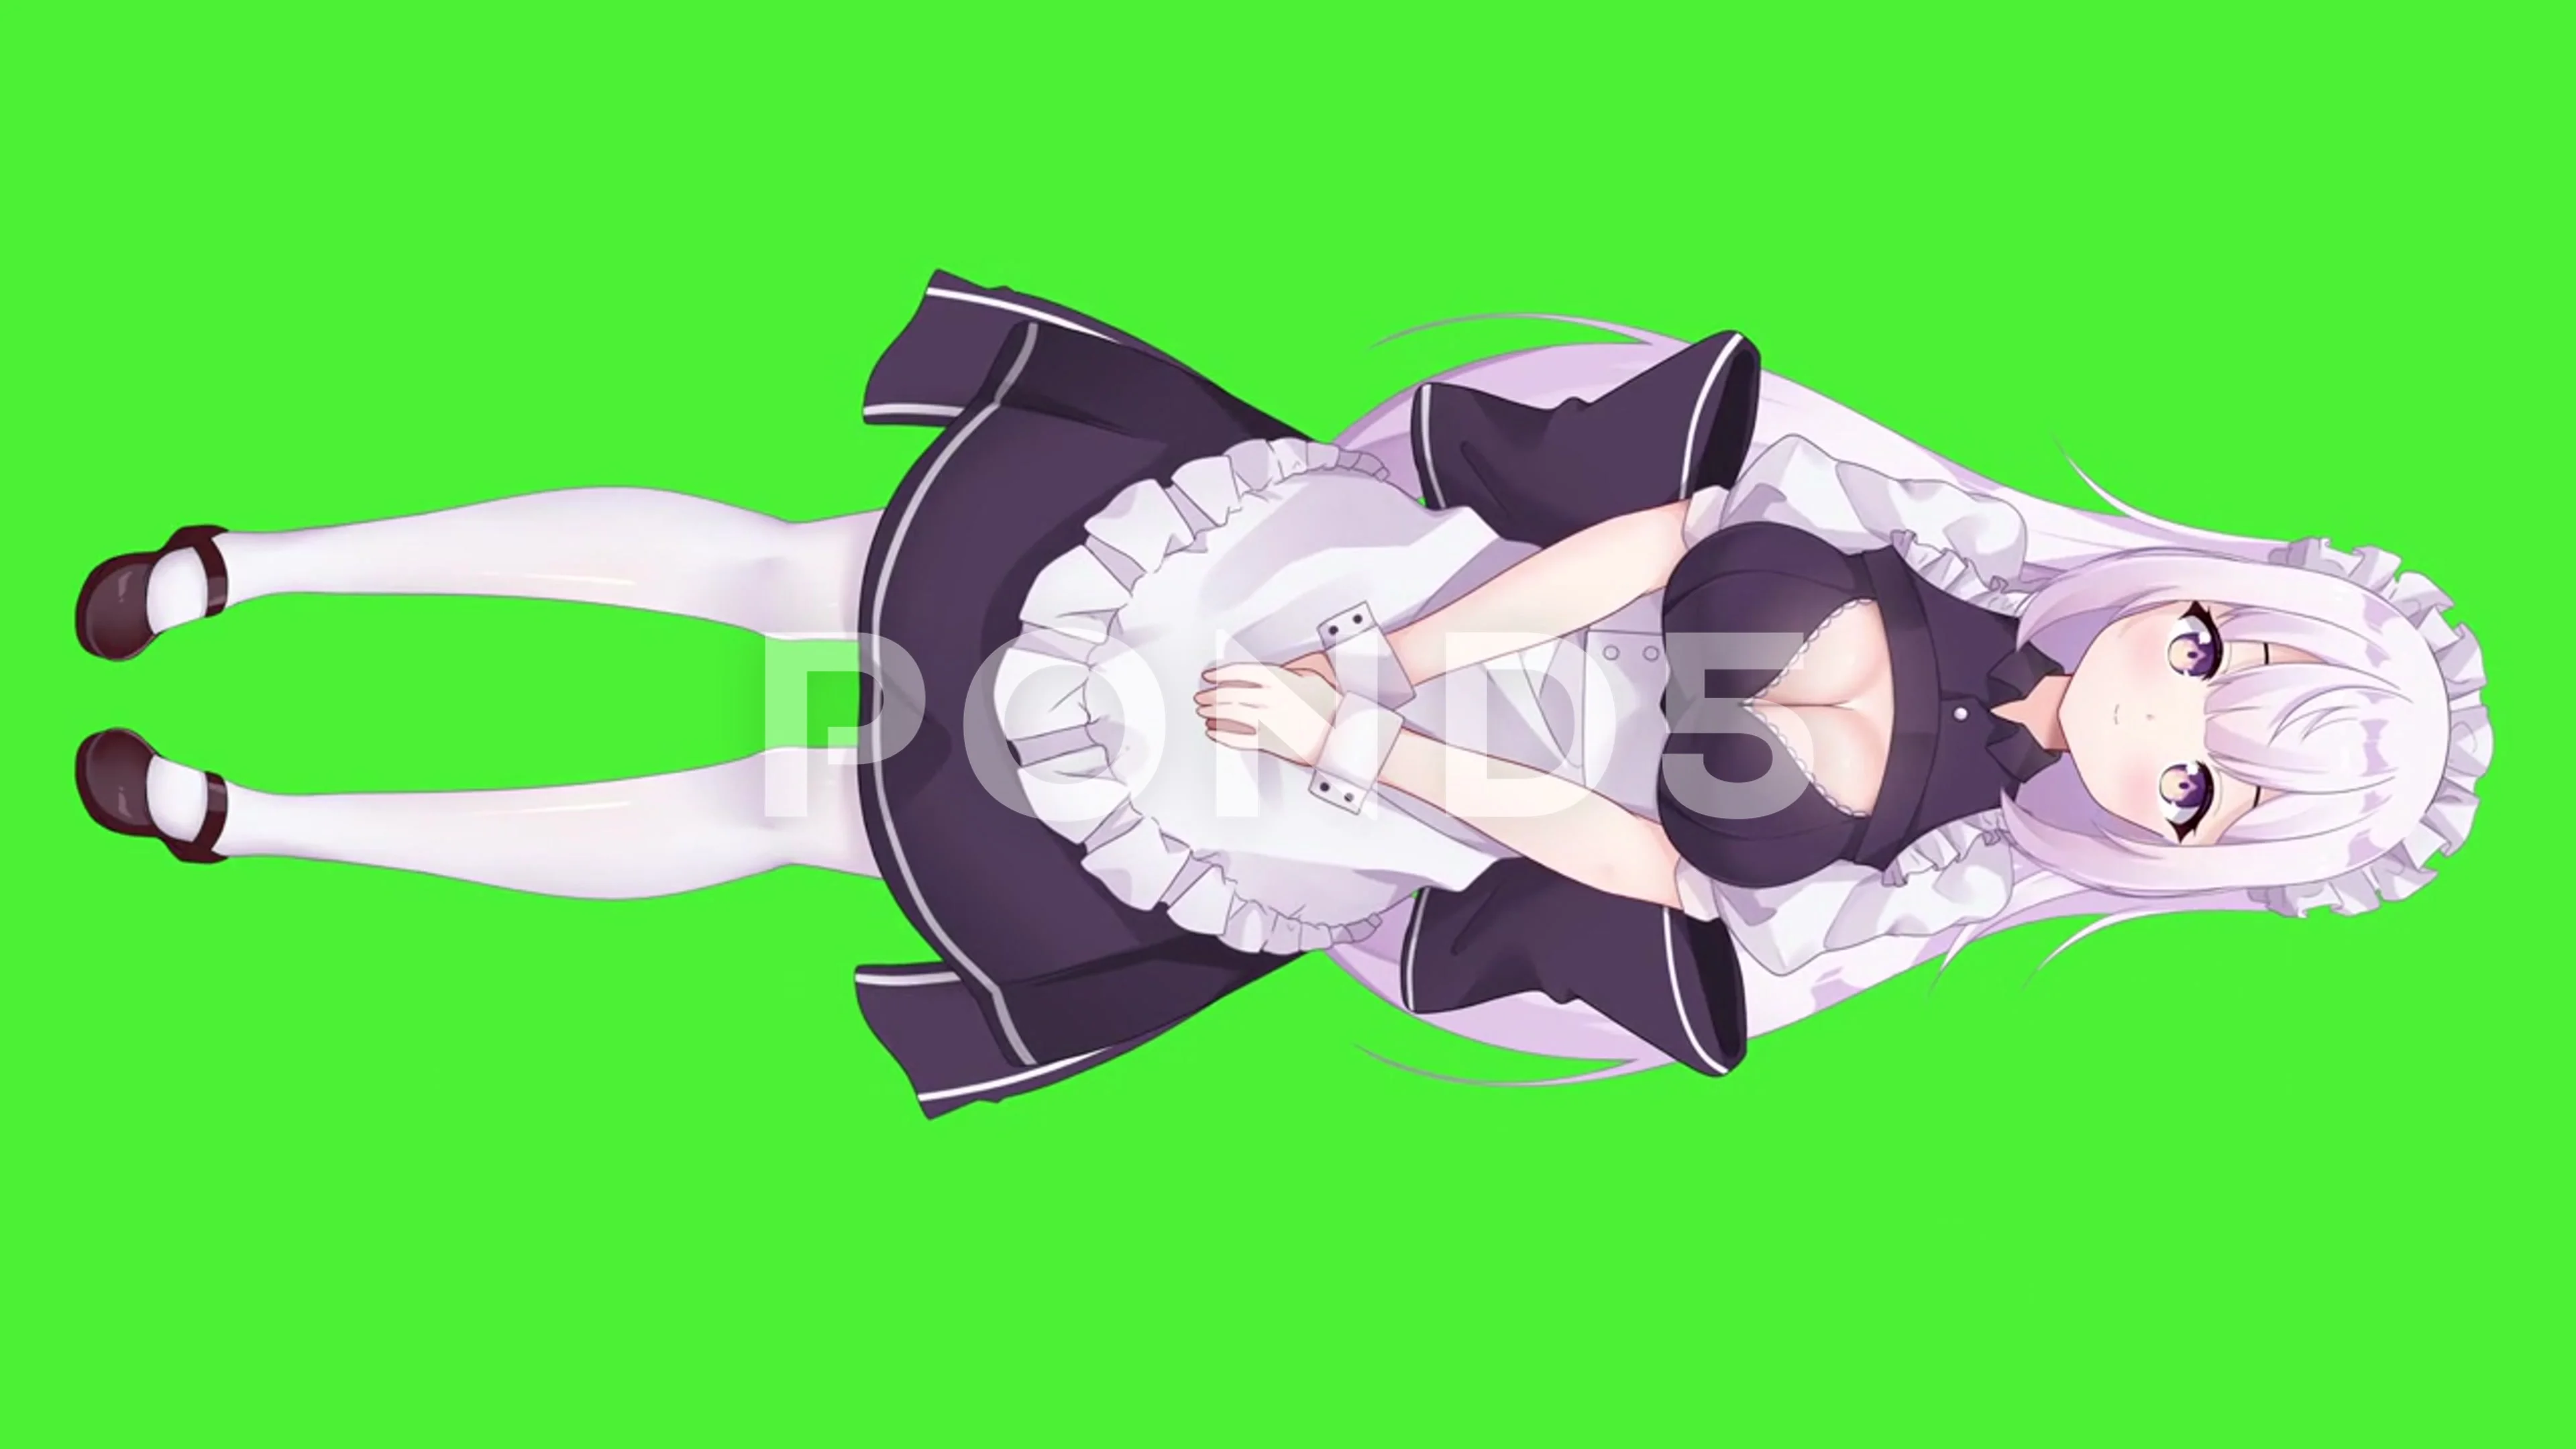 The 30 BEST Maid Anime Characters Who Deserve Praise